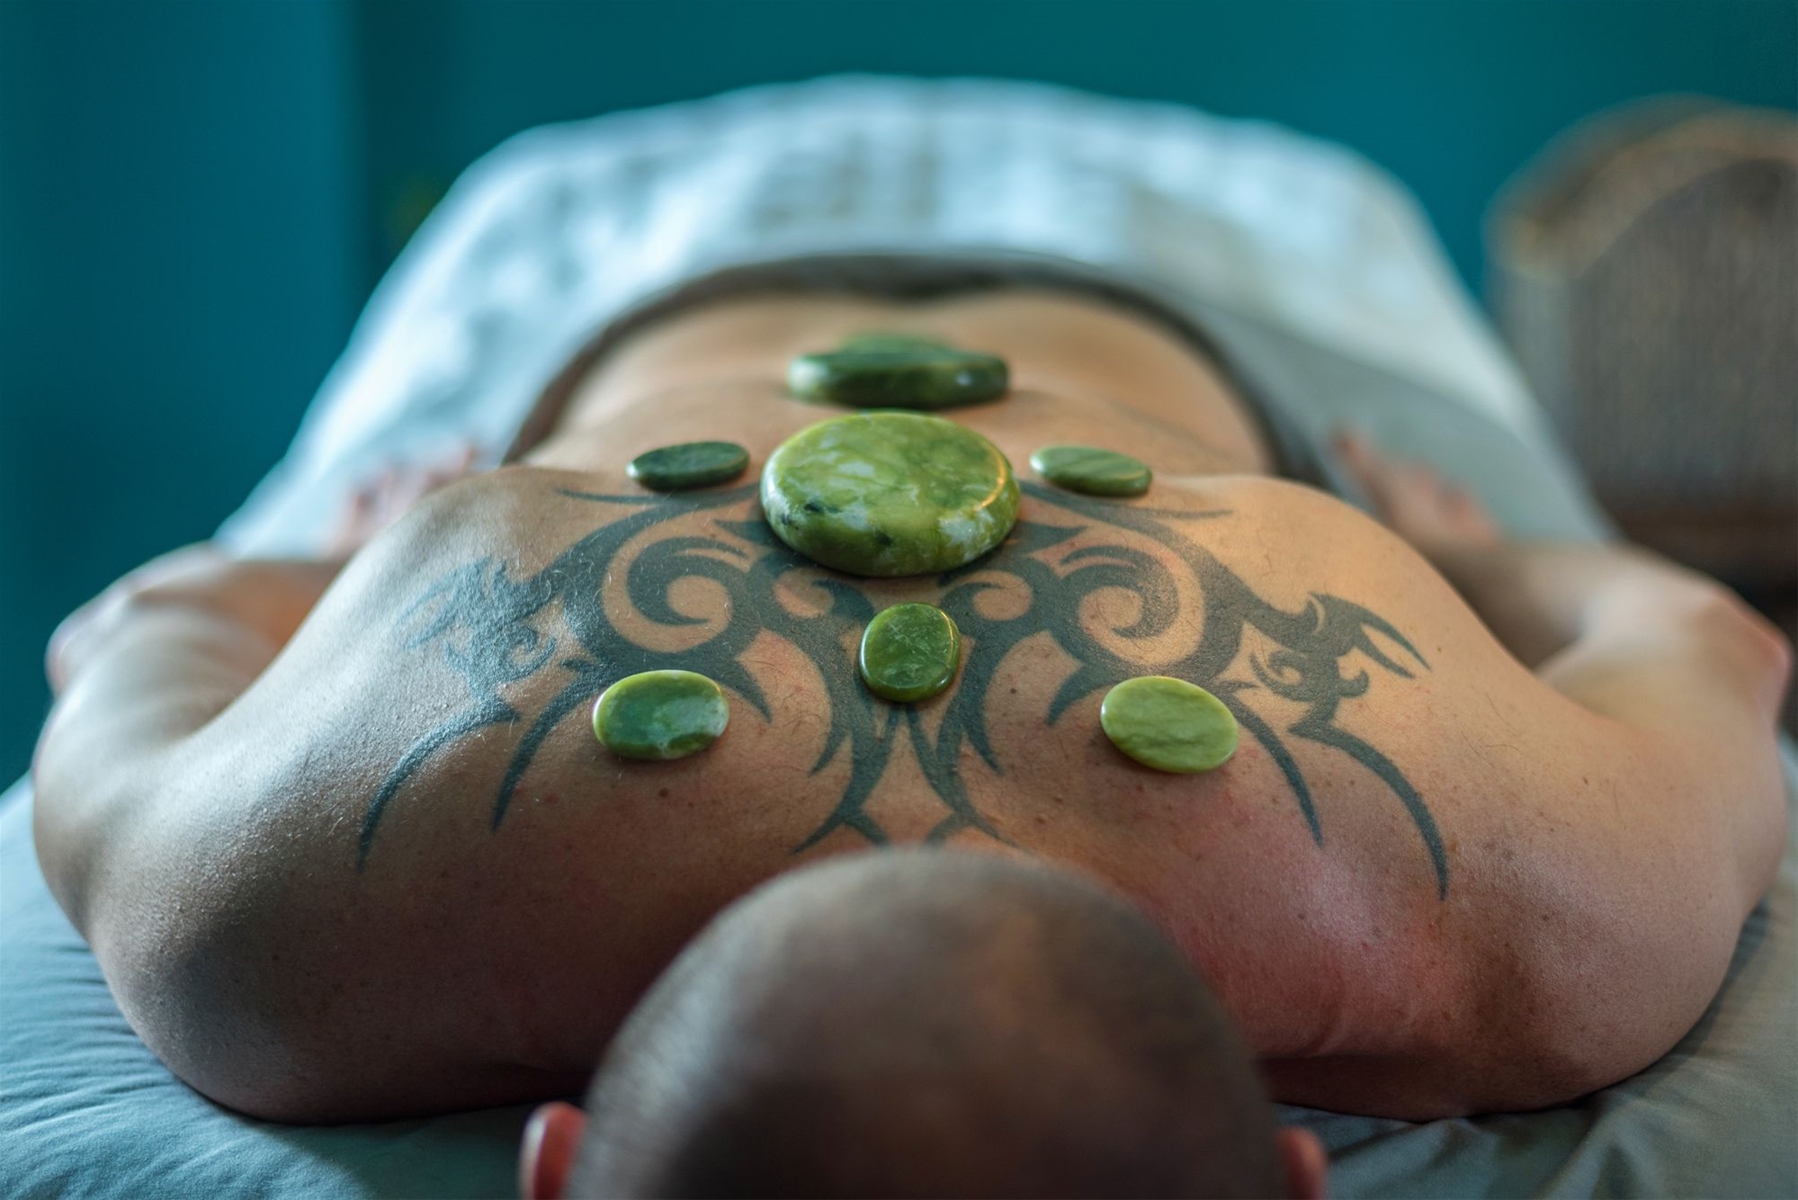 Relax and unwind at Urban Exhale Massage